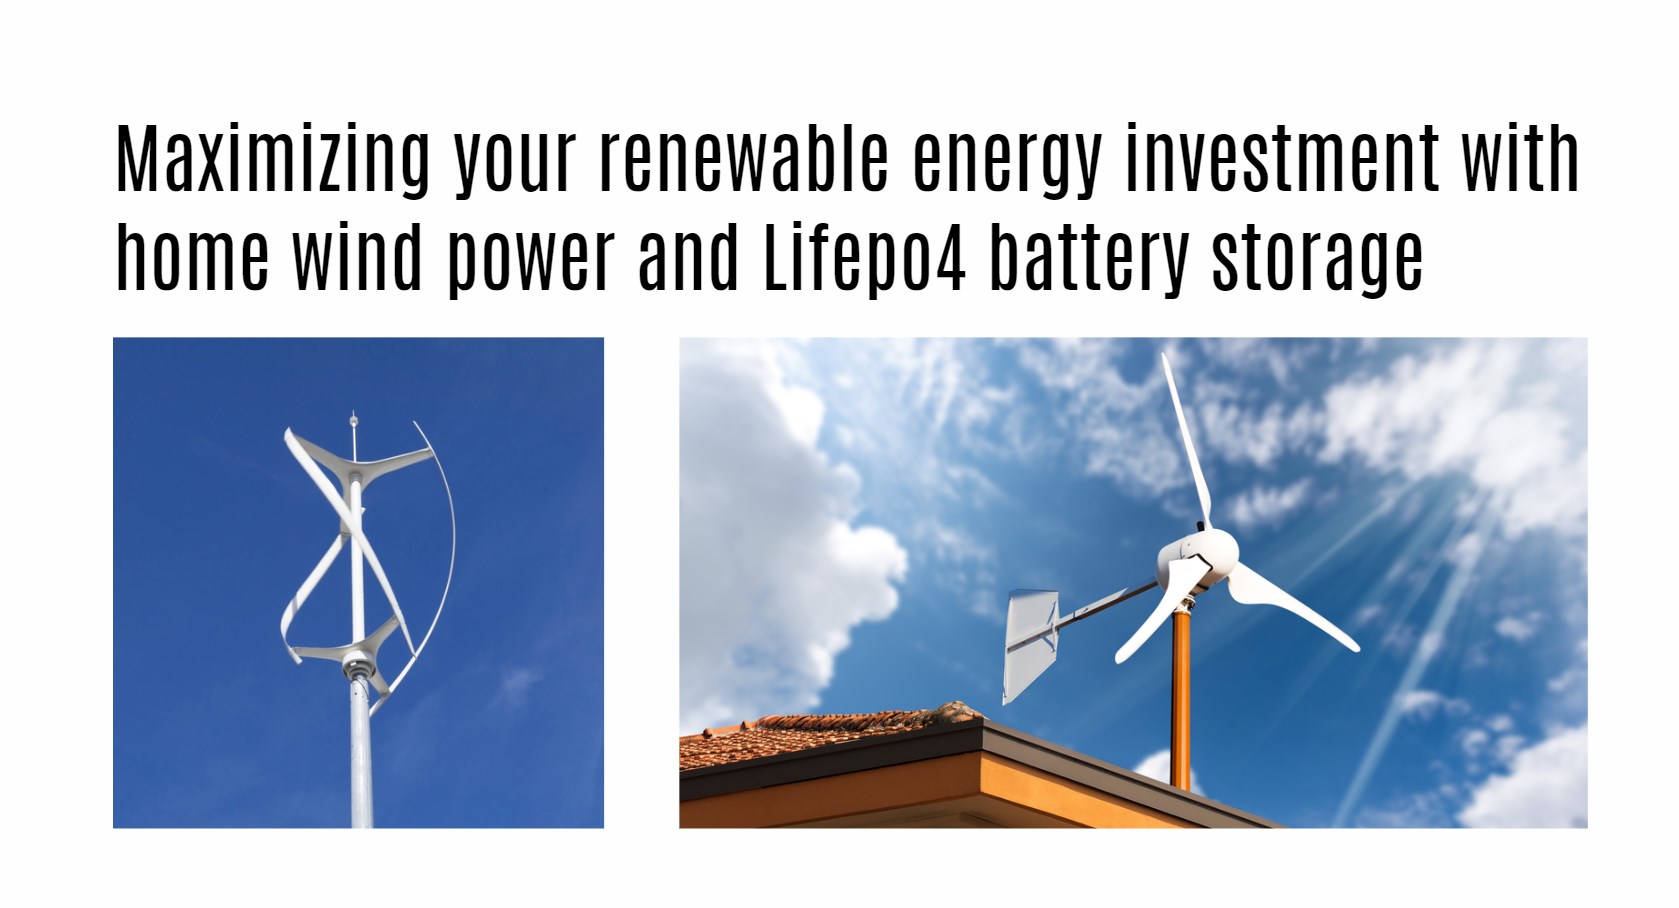 Maximizing your renewable energy investment with home wind power and Lifepo4 battery storage